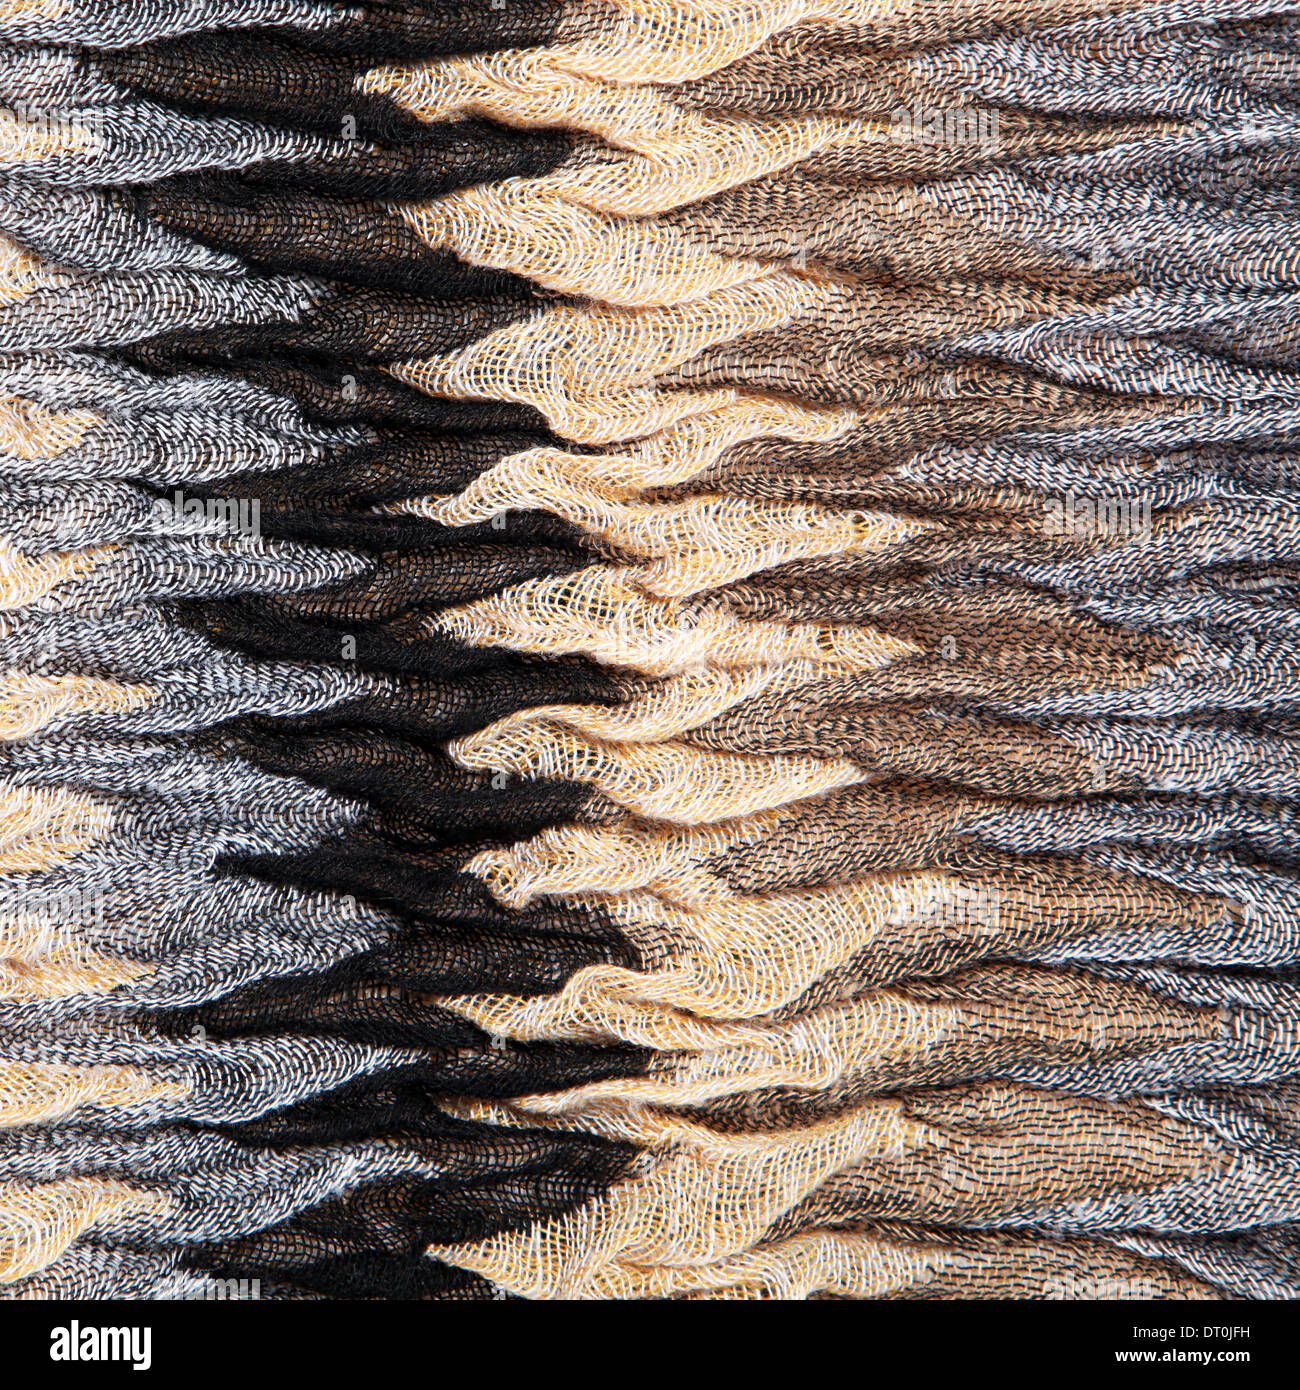 Luxurious knit textured ruched fabric with a distinctive zig-zag striped pattern in shades of brown and grey Stock Photo